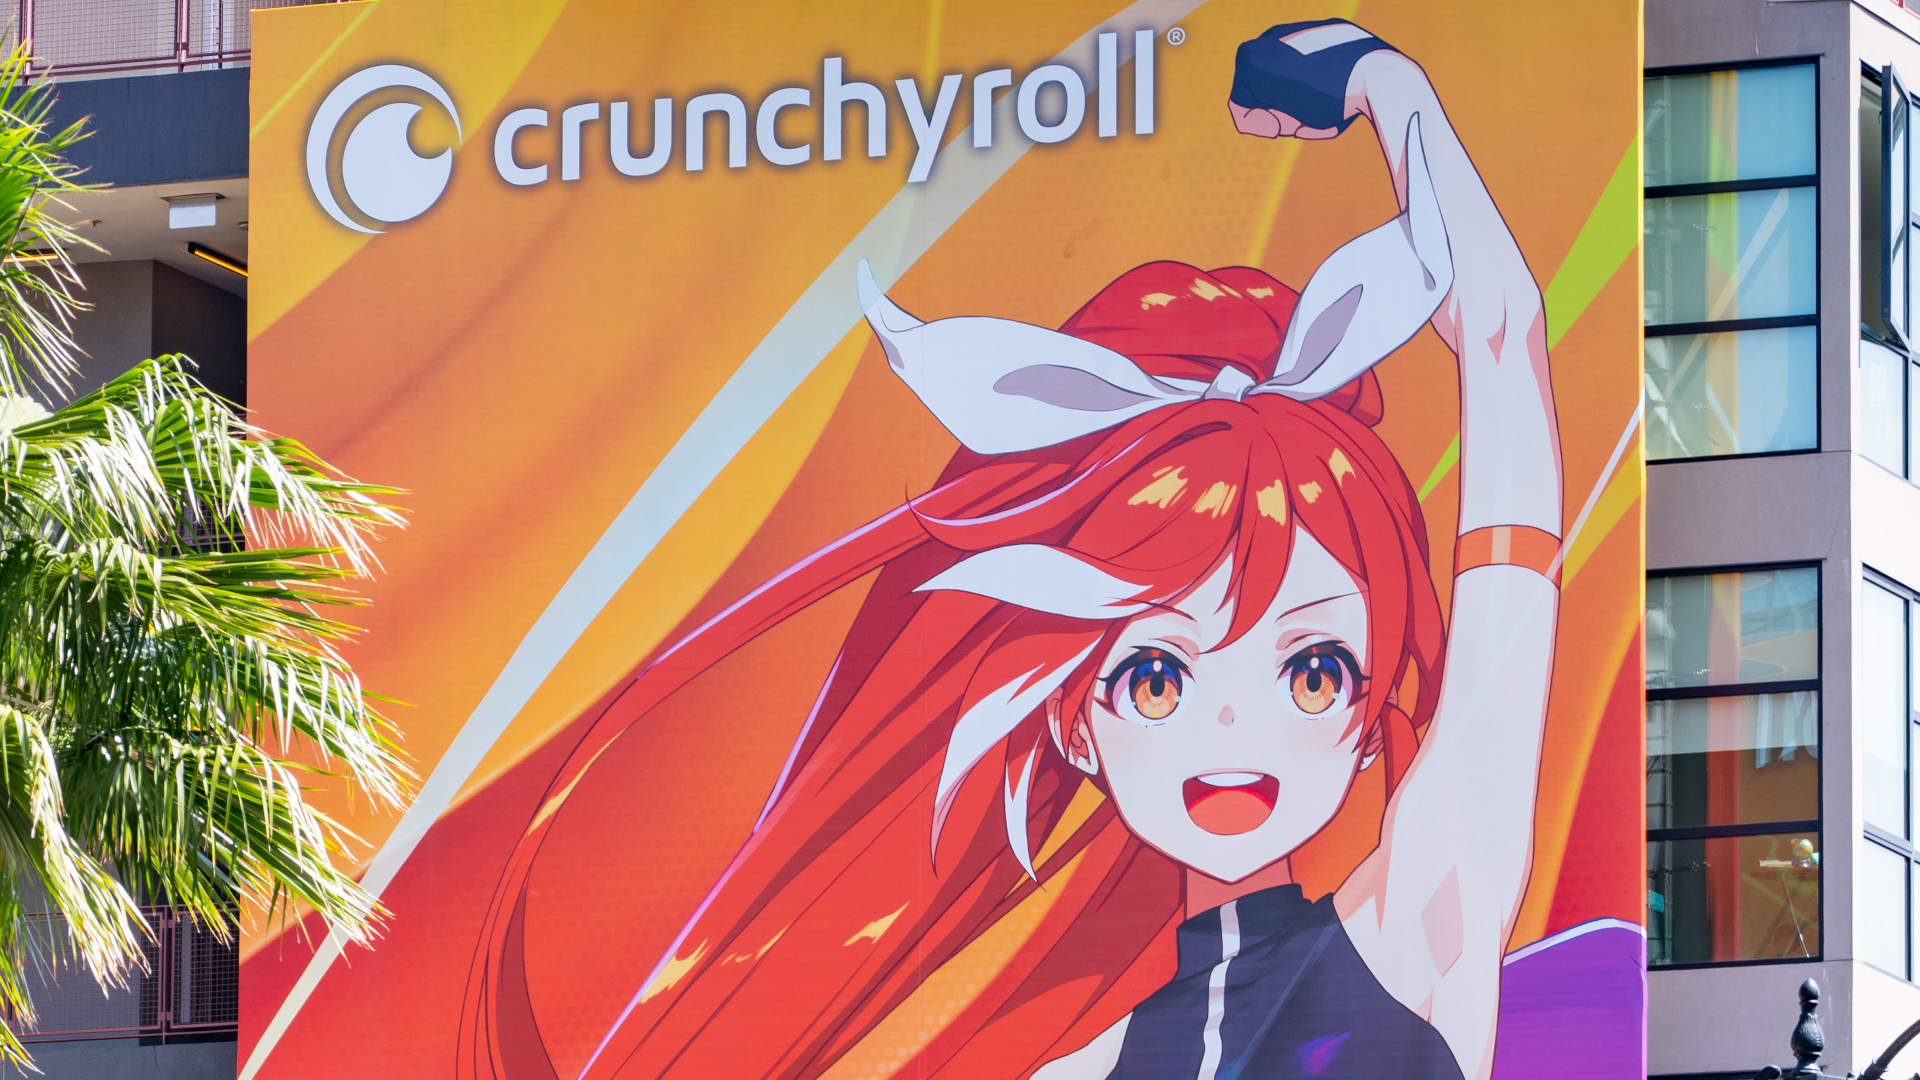 It will not by ANY means let me get this with any card I put in to pay : r/ Crunchyroll